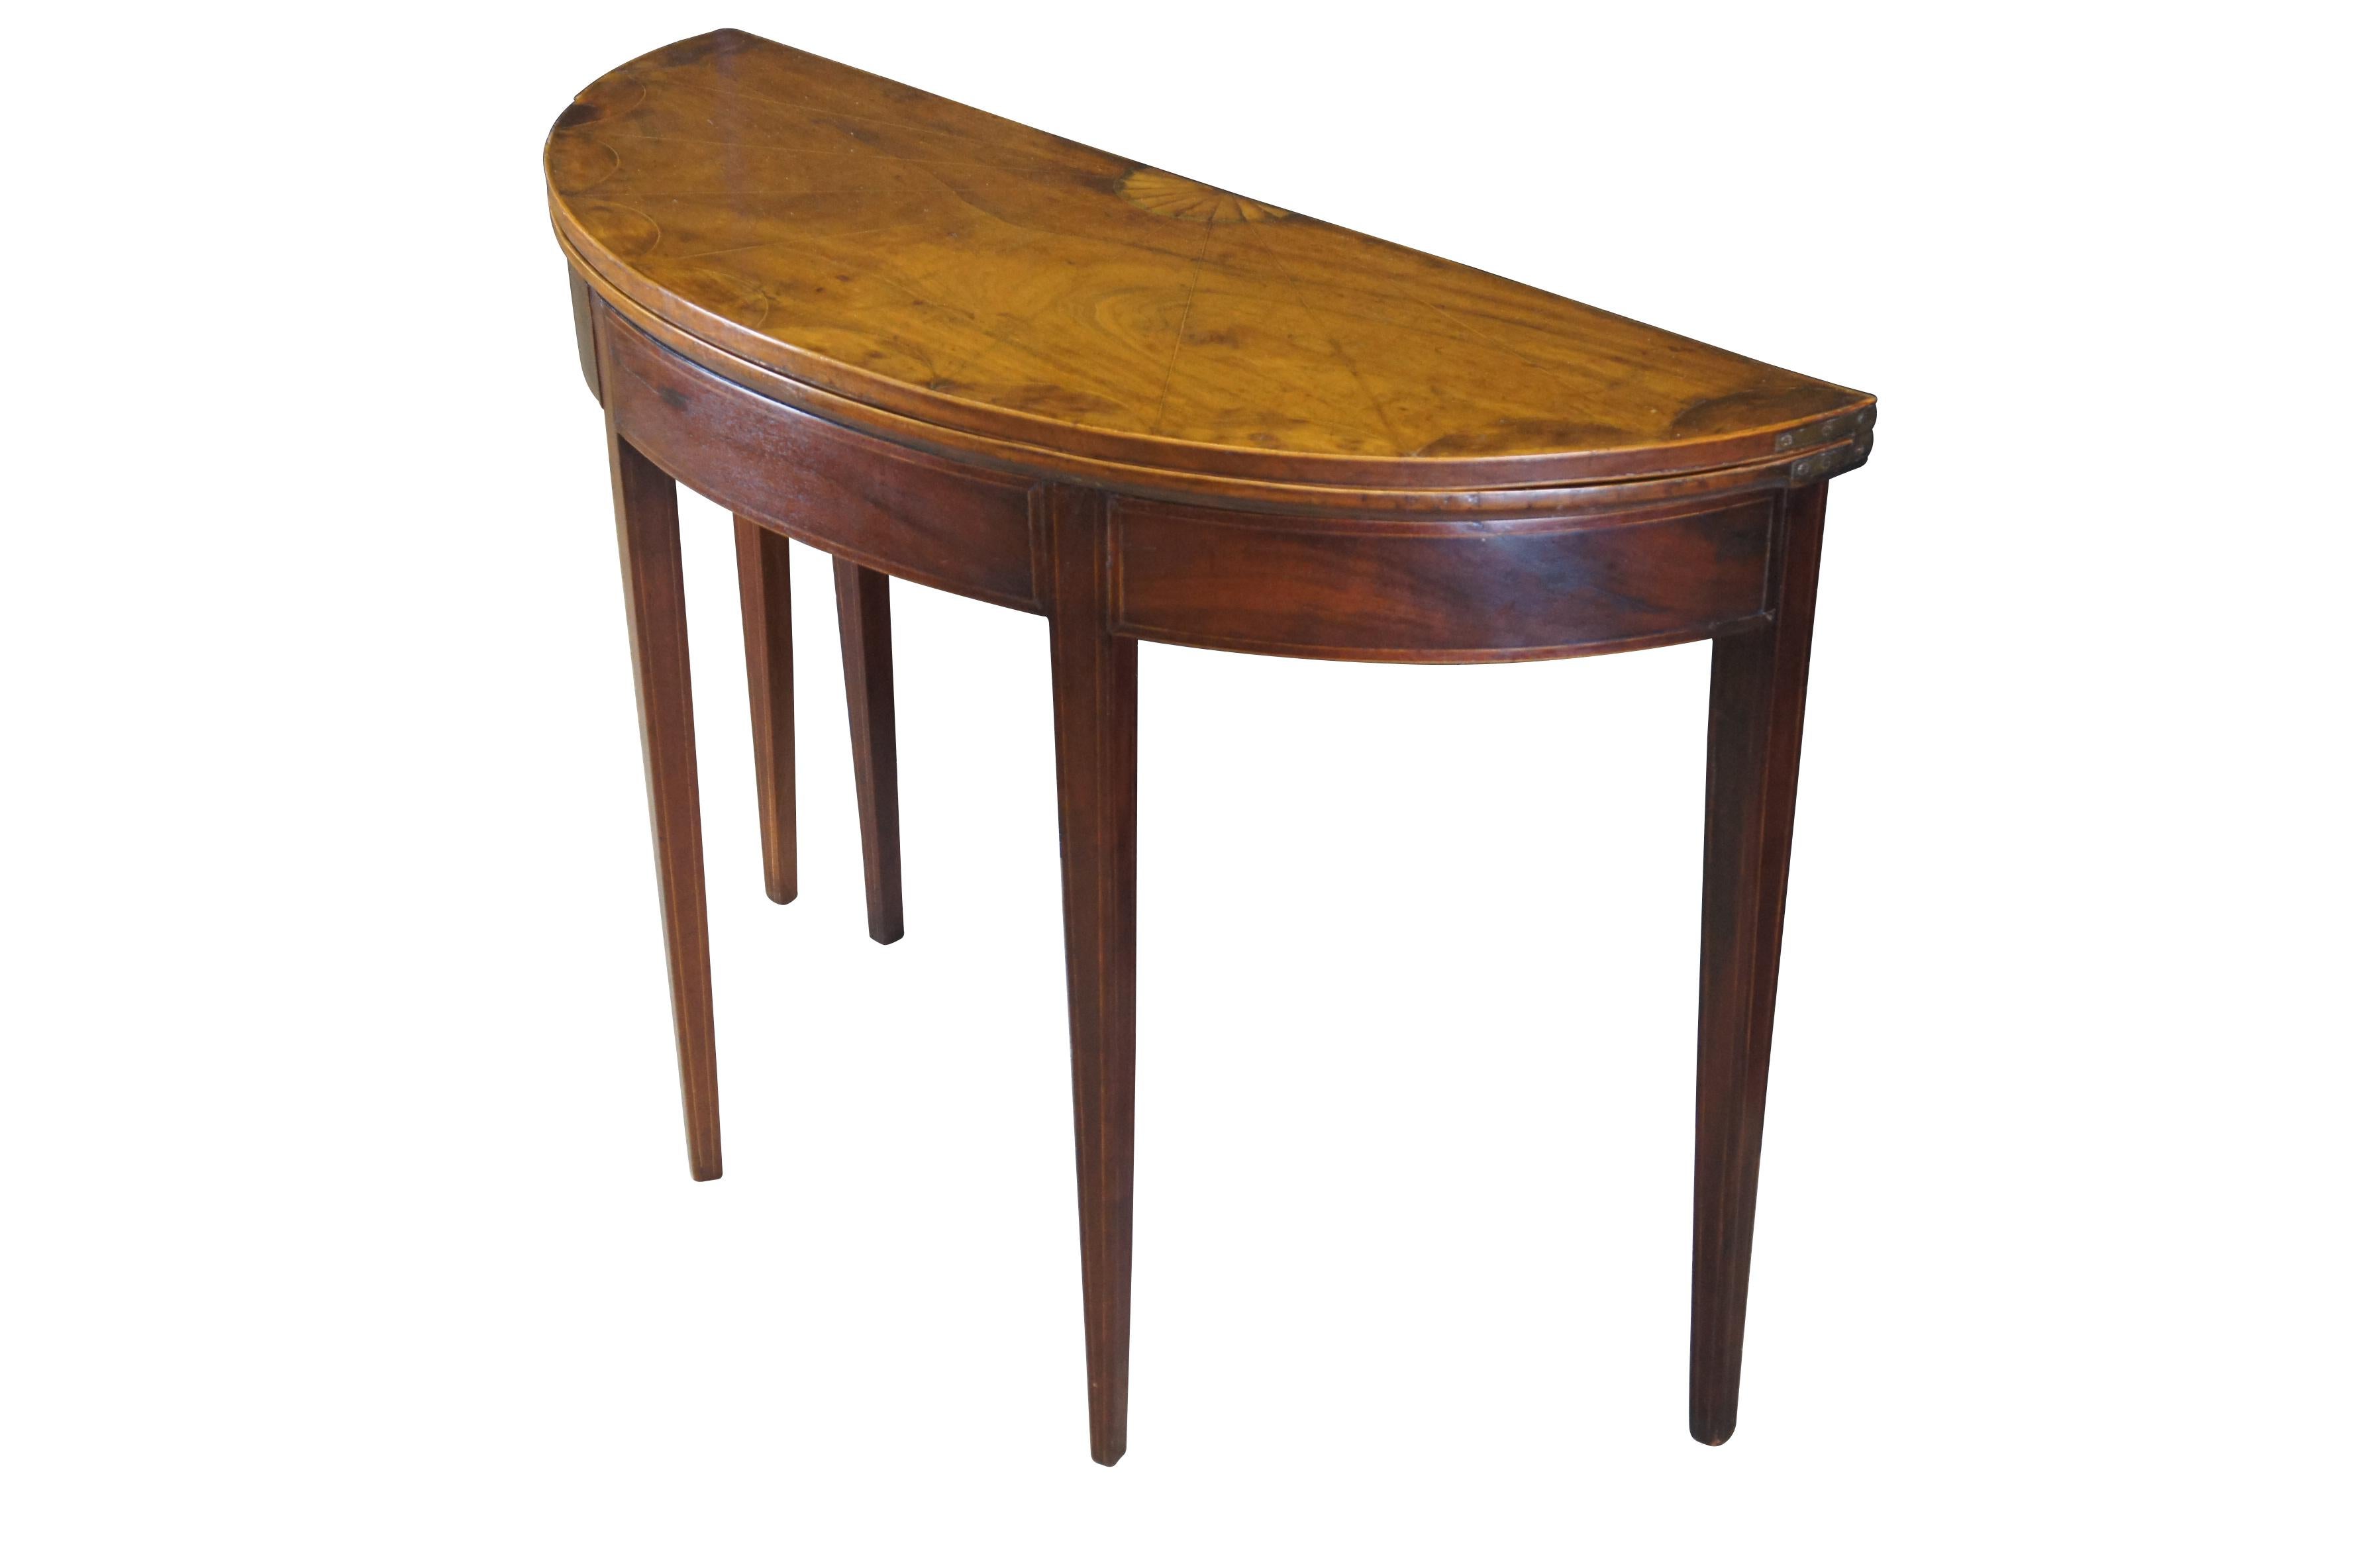 Antique late 18th early 19th century Sheraton period mahogany card / console / tea table.  Made of mahogany featuring inlaid fruitwood shell and web design top which opens to an oval green felt playing surface, supported by tapered legs.  Circa